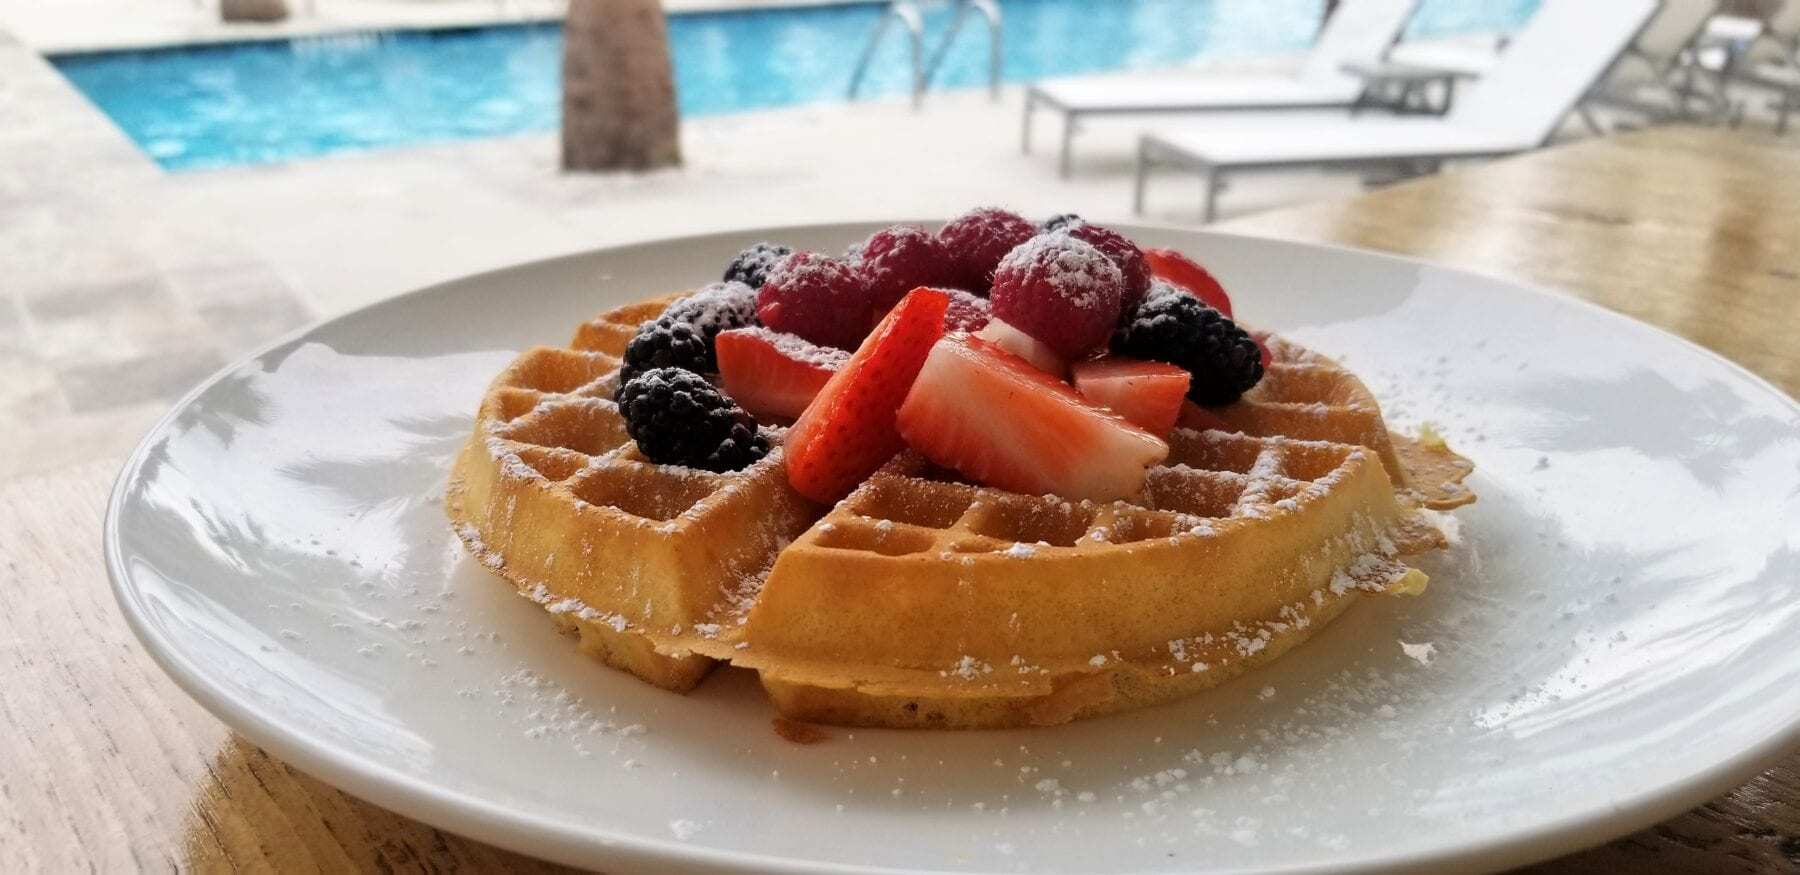 "Delicious Homemade Waffle with Fresh Strawberries and Blueberries, served by the Resort Pool on a Sunny Summer Day at Hotel Indigo, Mount Pleasant, South Carolina."